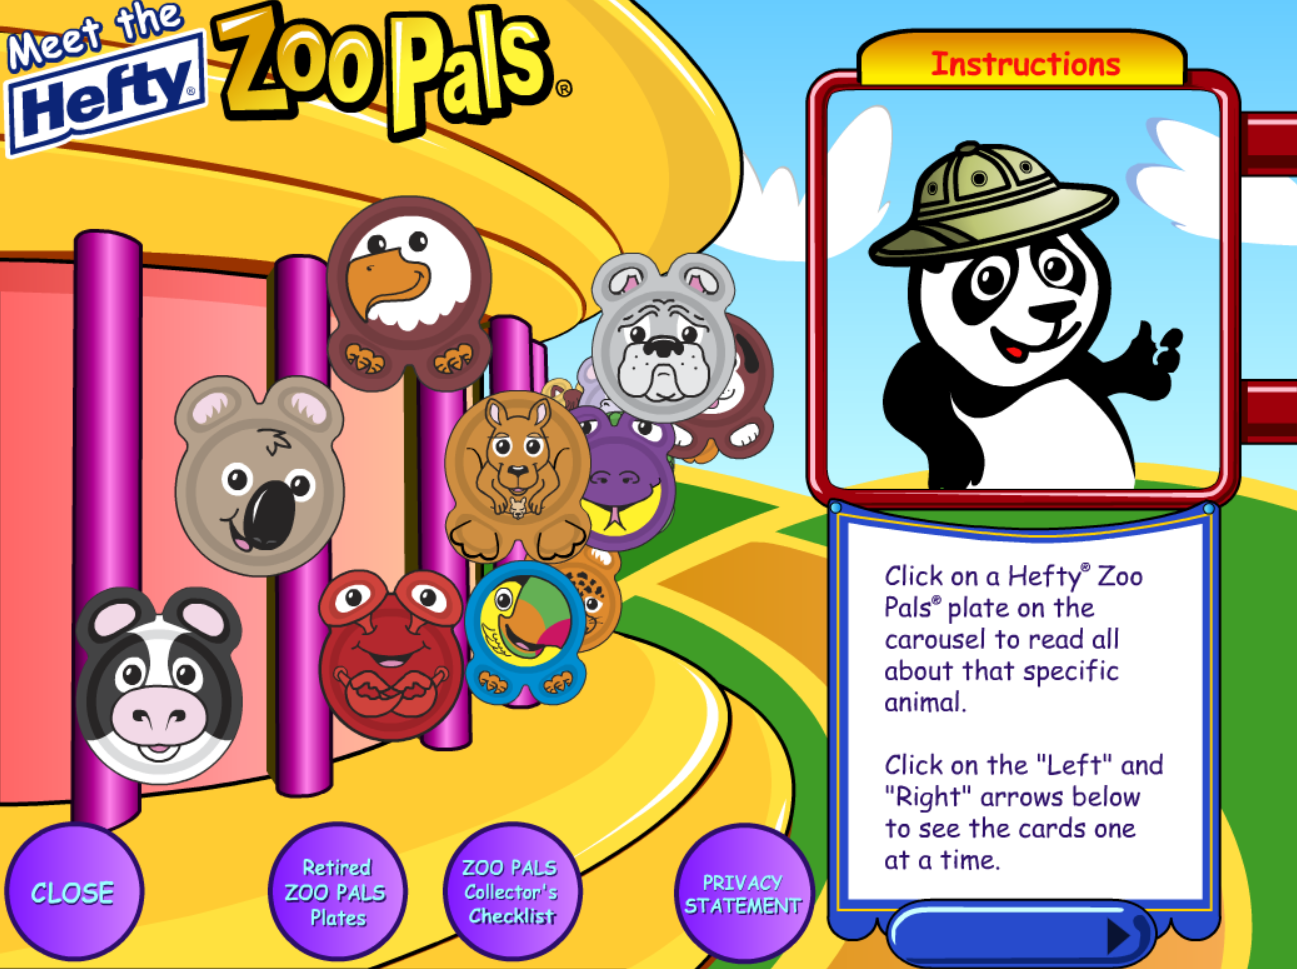 https://archive.org/serve/carousel_ZooPals/Flash.PNG